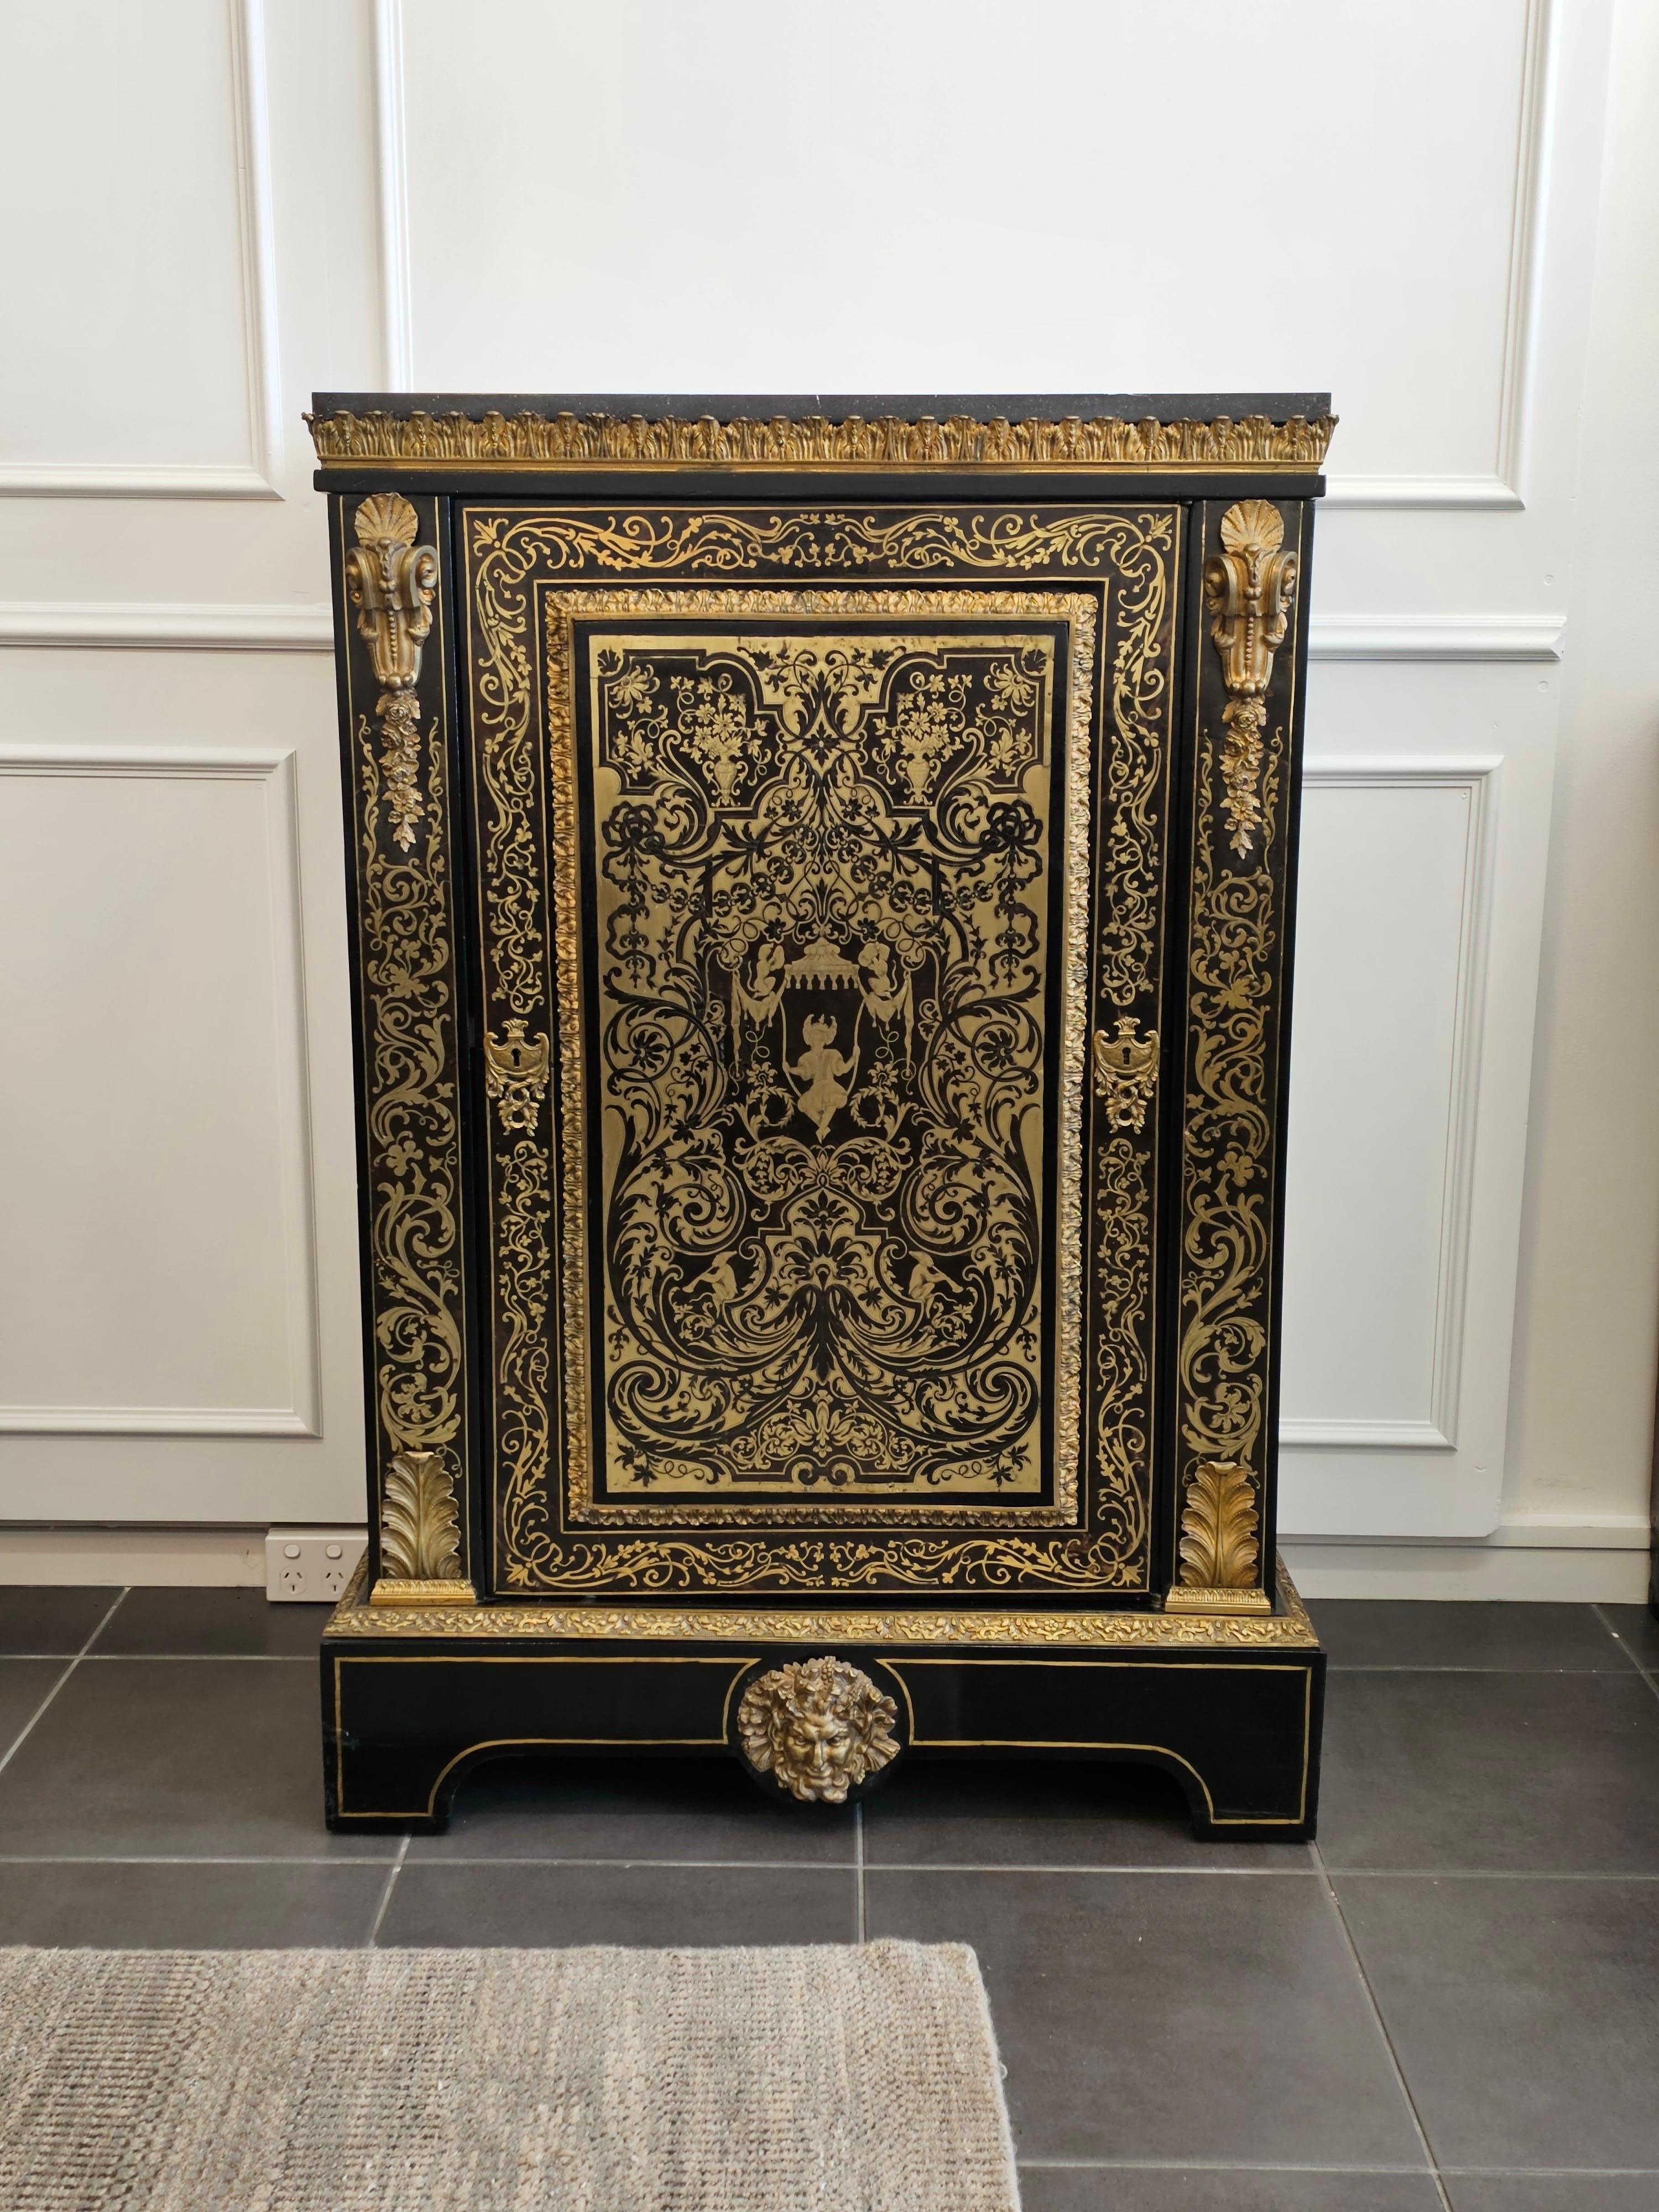 A Pair of Napoleon III Ormolu-Mounted Inlaid Boulle Pier Cabinets

A very fine pair of Boulle style Napoleon III Pier cabinets. The intricacies of the brass marquetry are complemented by ormolu motifs of Scallop Shells, Acanthus with beading,